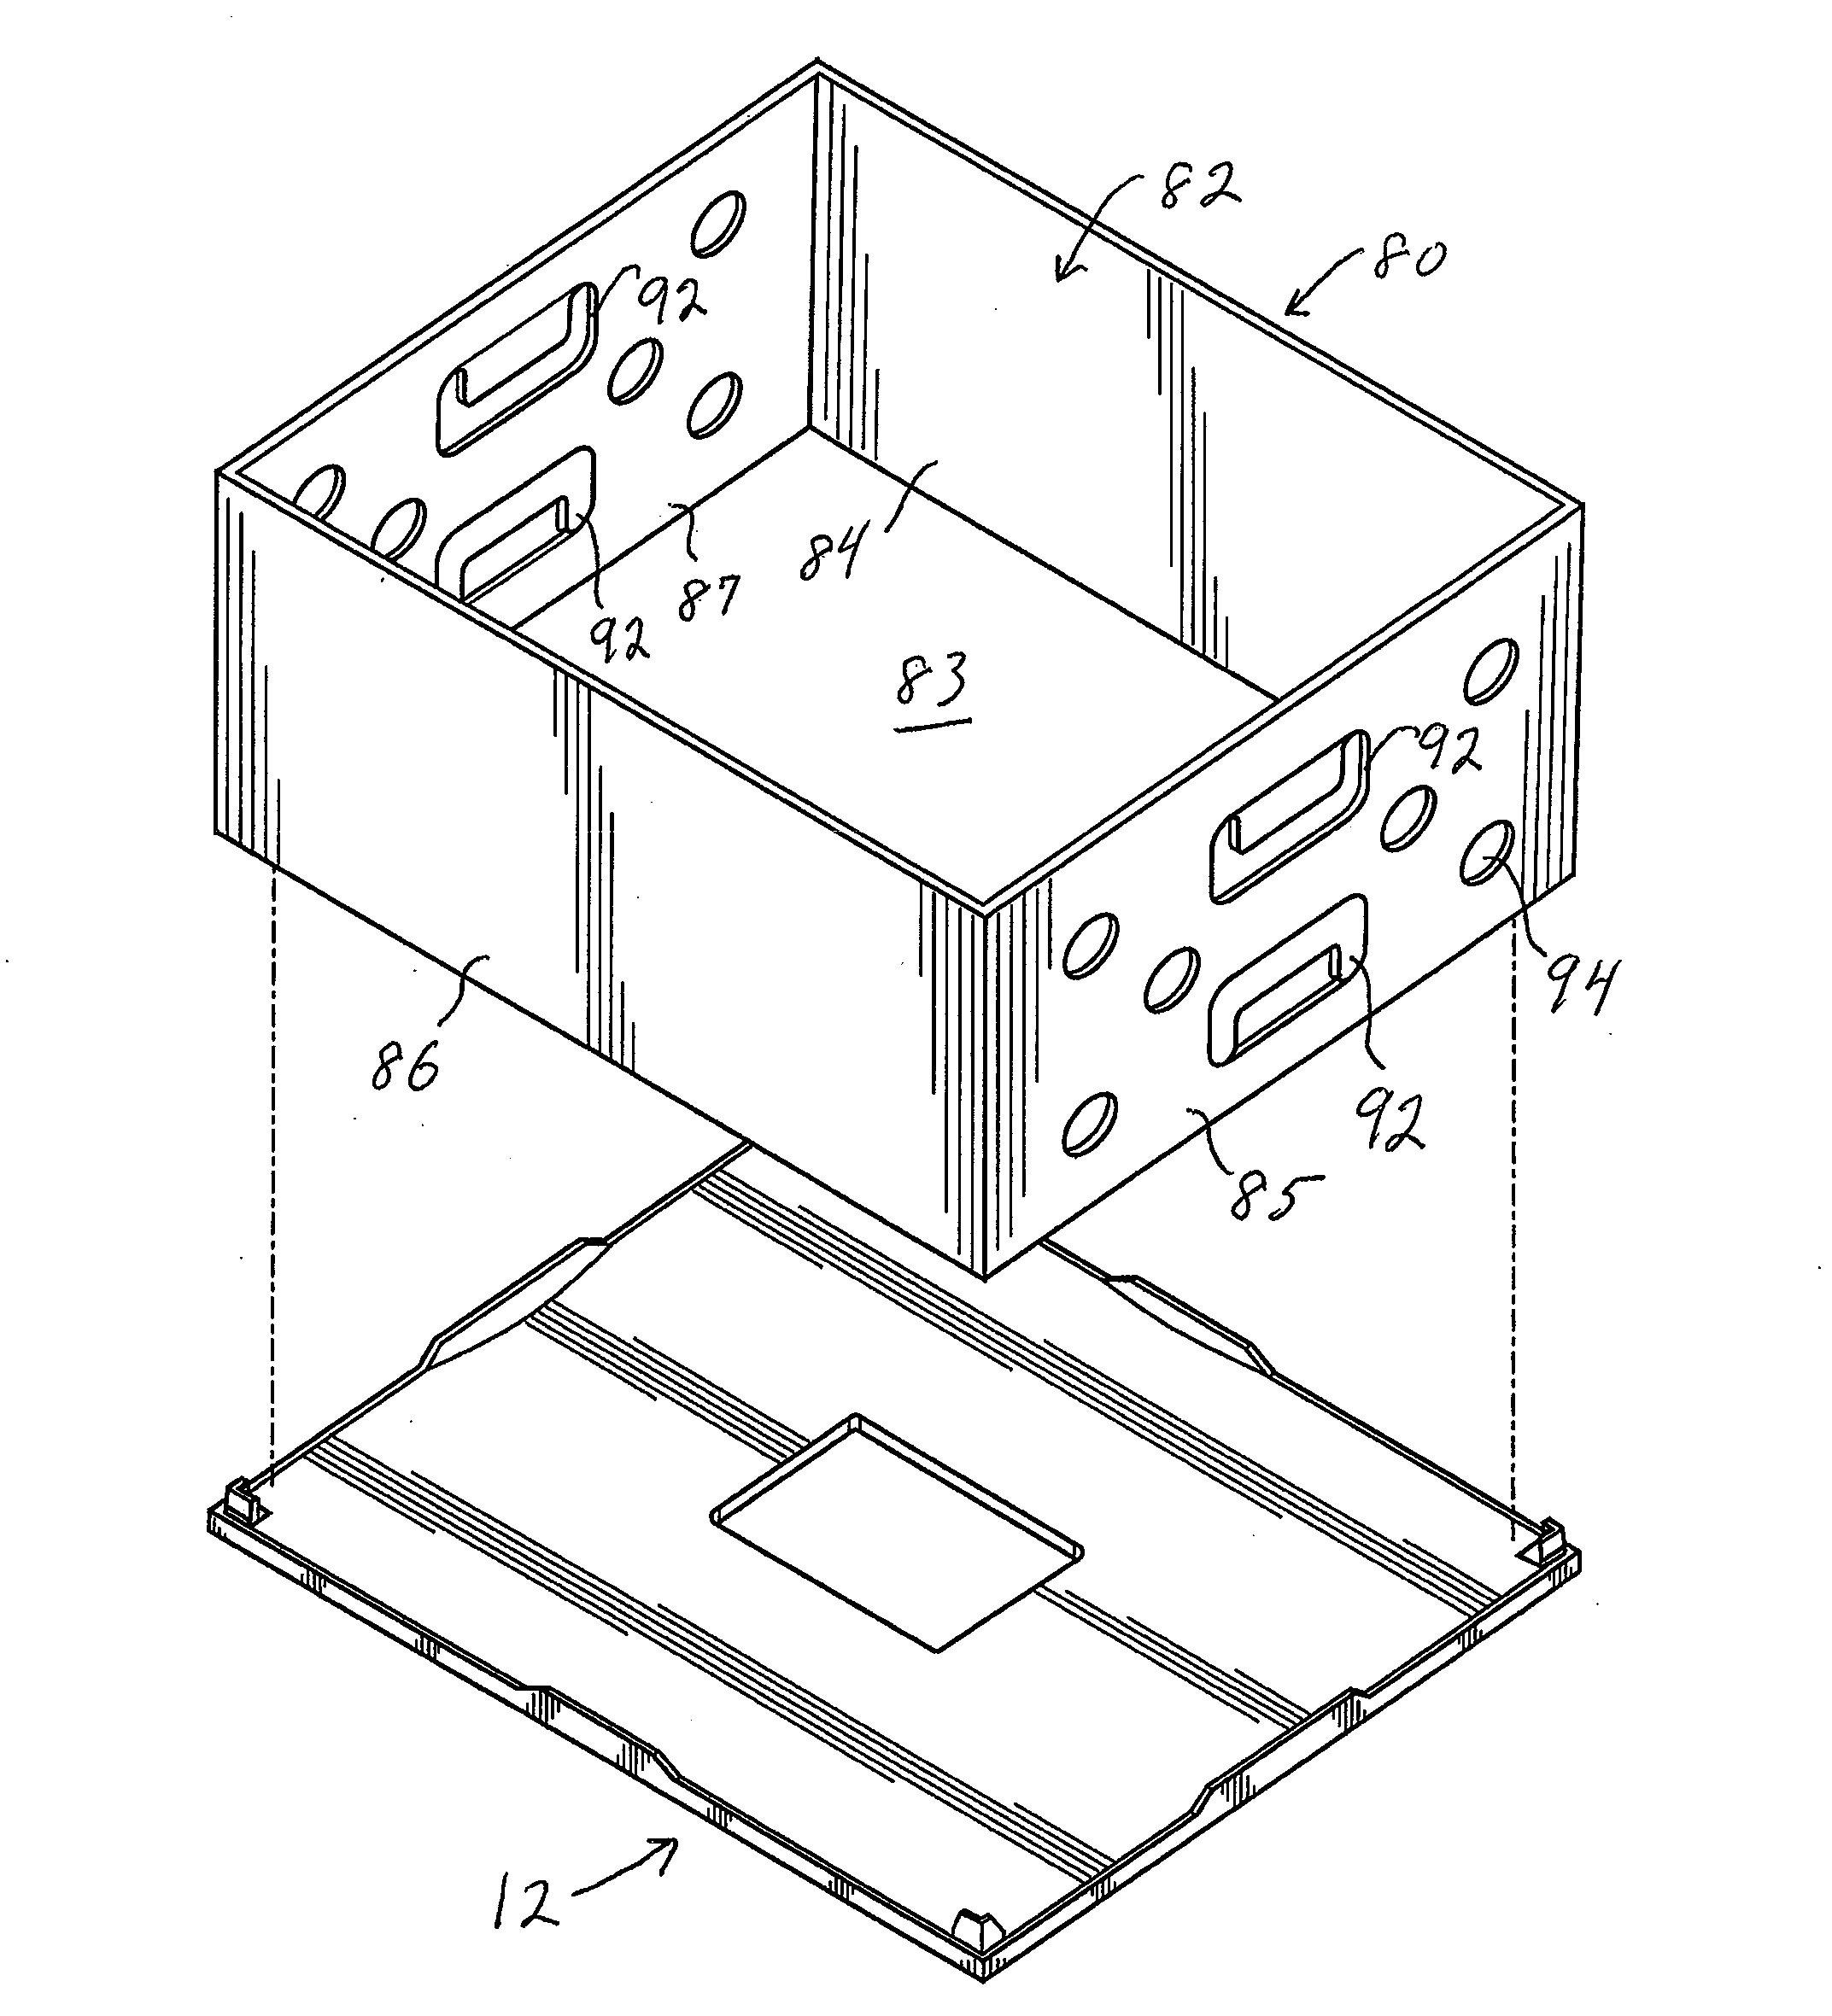 Reusable, Combined Multi-Part Product Shipping Box and Display Tray